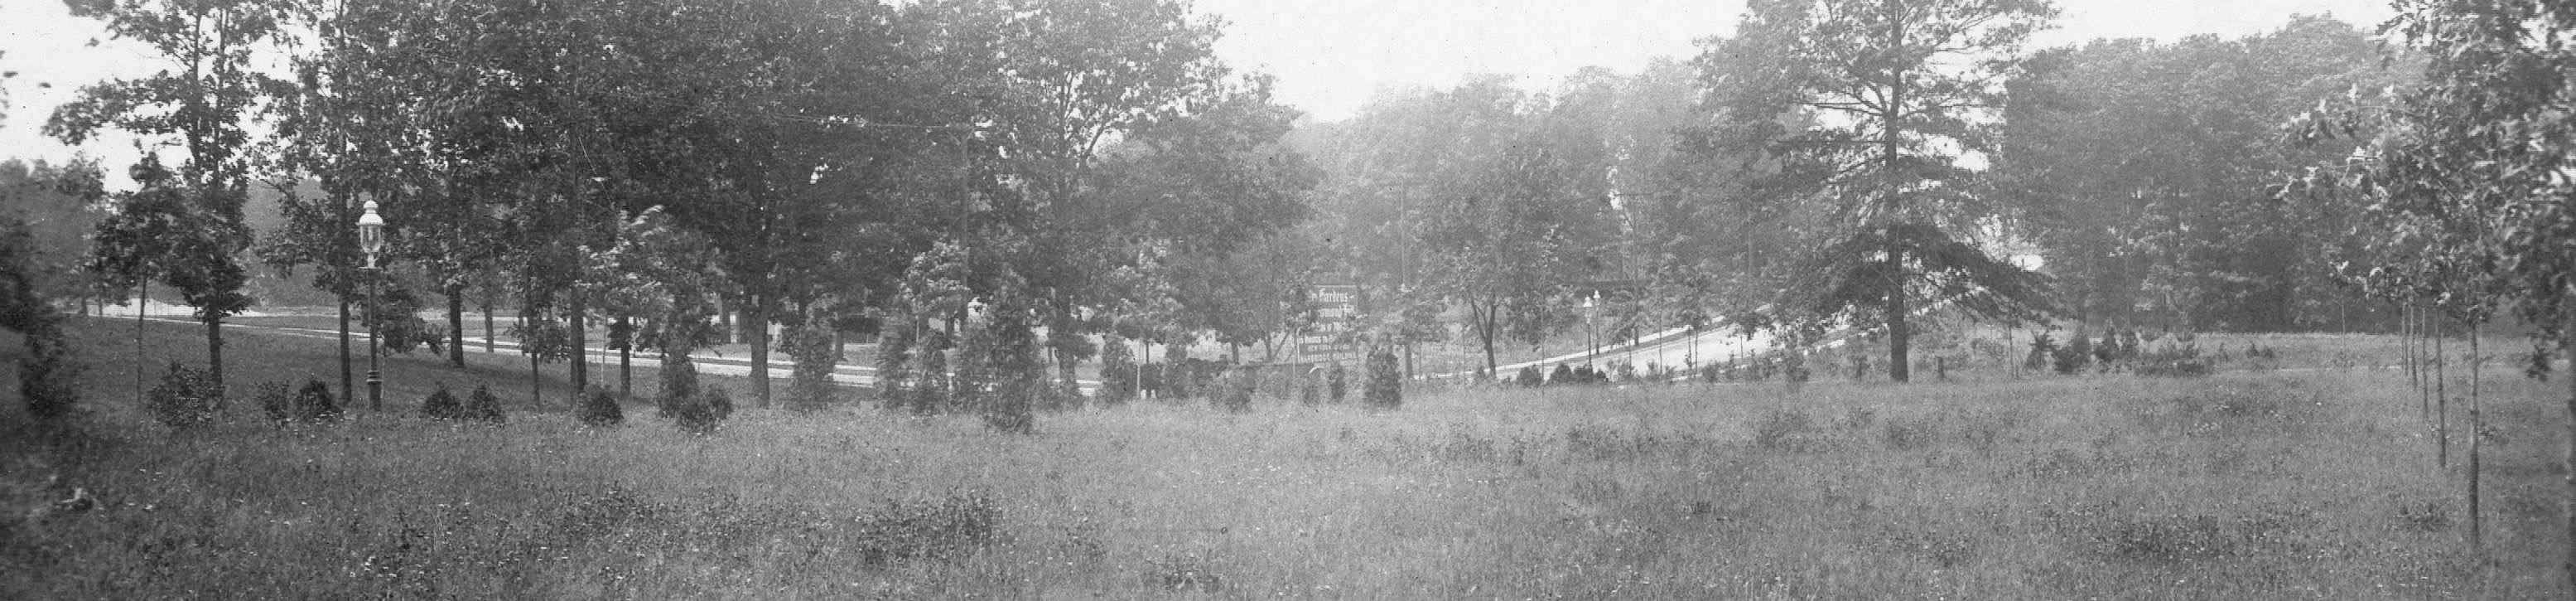 Using today's landmarks, the photographer is standing in the vicinity of Grenfell and Audley Streets looking in the direction of Forest Hills.  The road that curves across the picture was called Hillside Avenue, but it is not the one we know today.  This Hillside Avenue ran from 118th Street up to Union Turnpike.  Barely visible on the extreme left side of the picture (to the left of the street light, beyond Hillside Avenue) is a kettle pond which used to exist near Beverly Road and Park Lane.